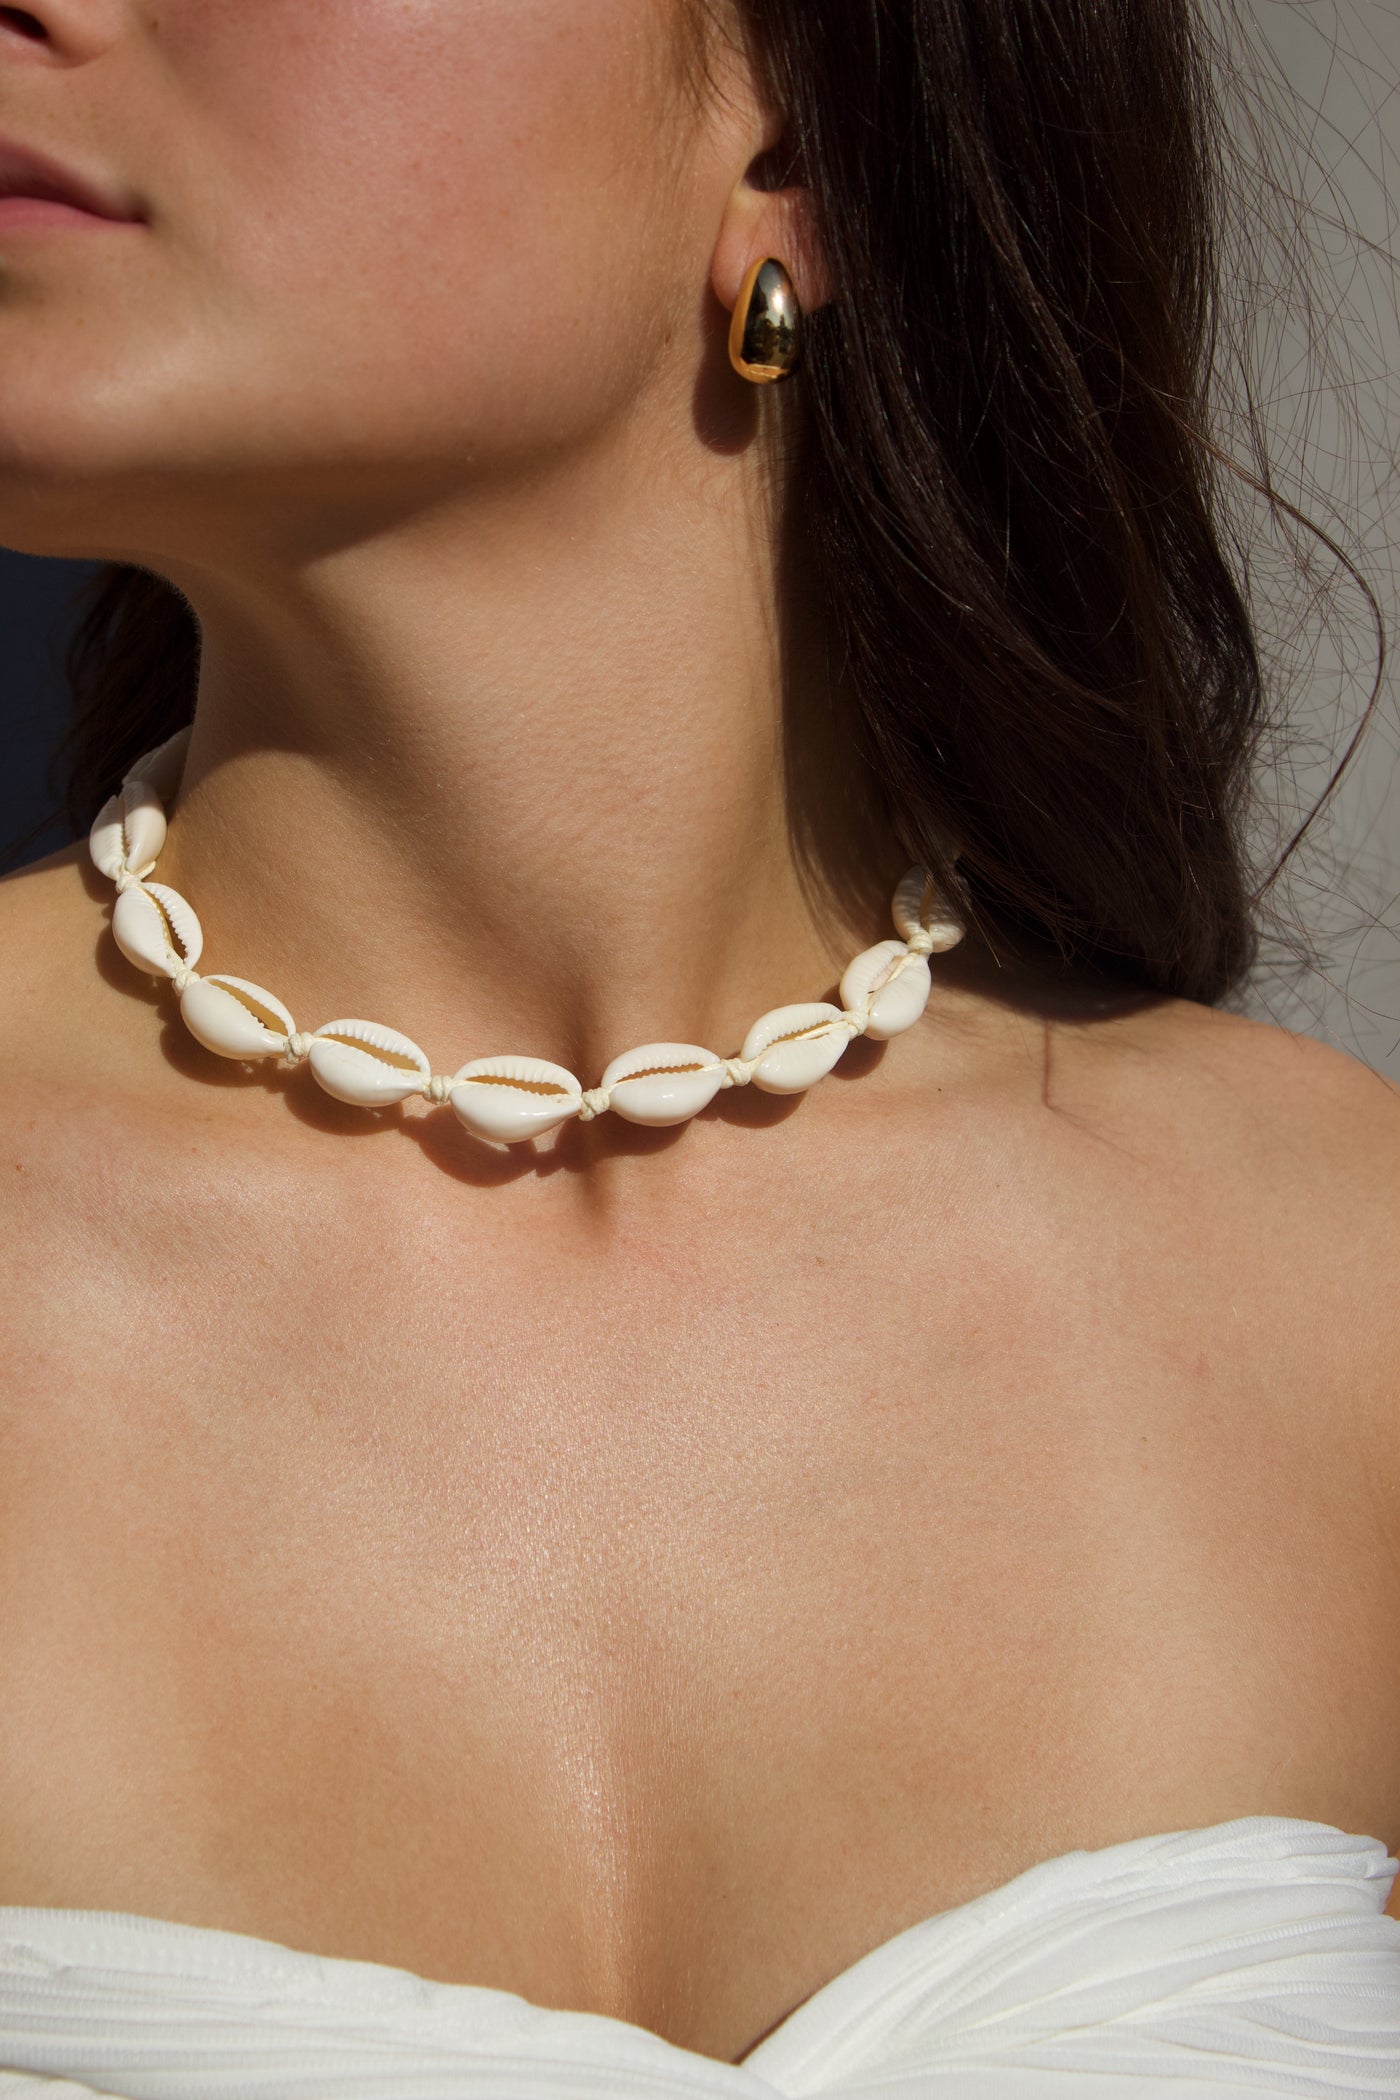 Shell necklace